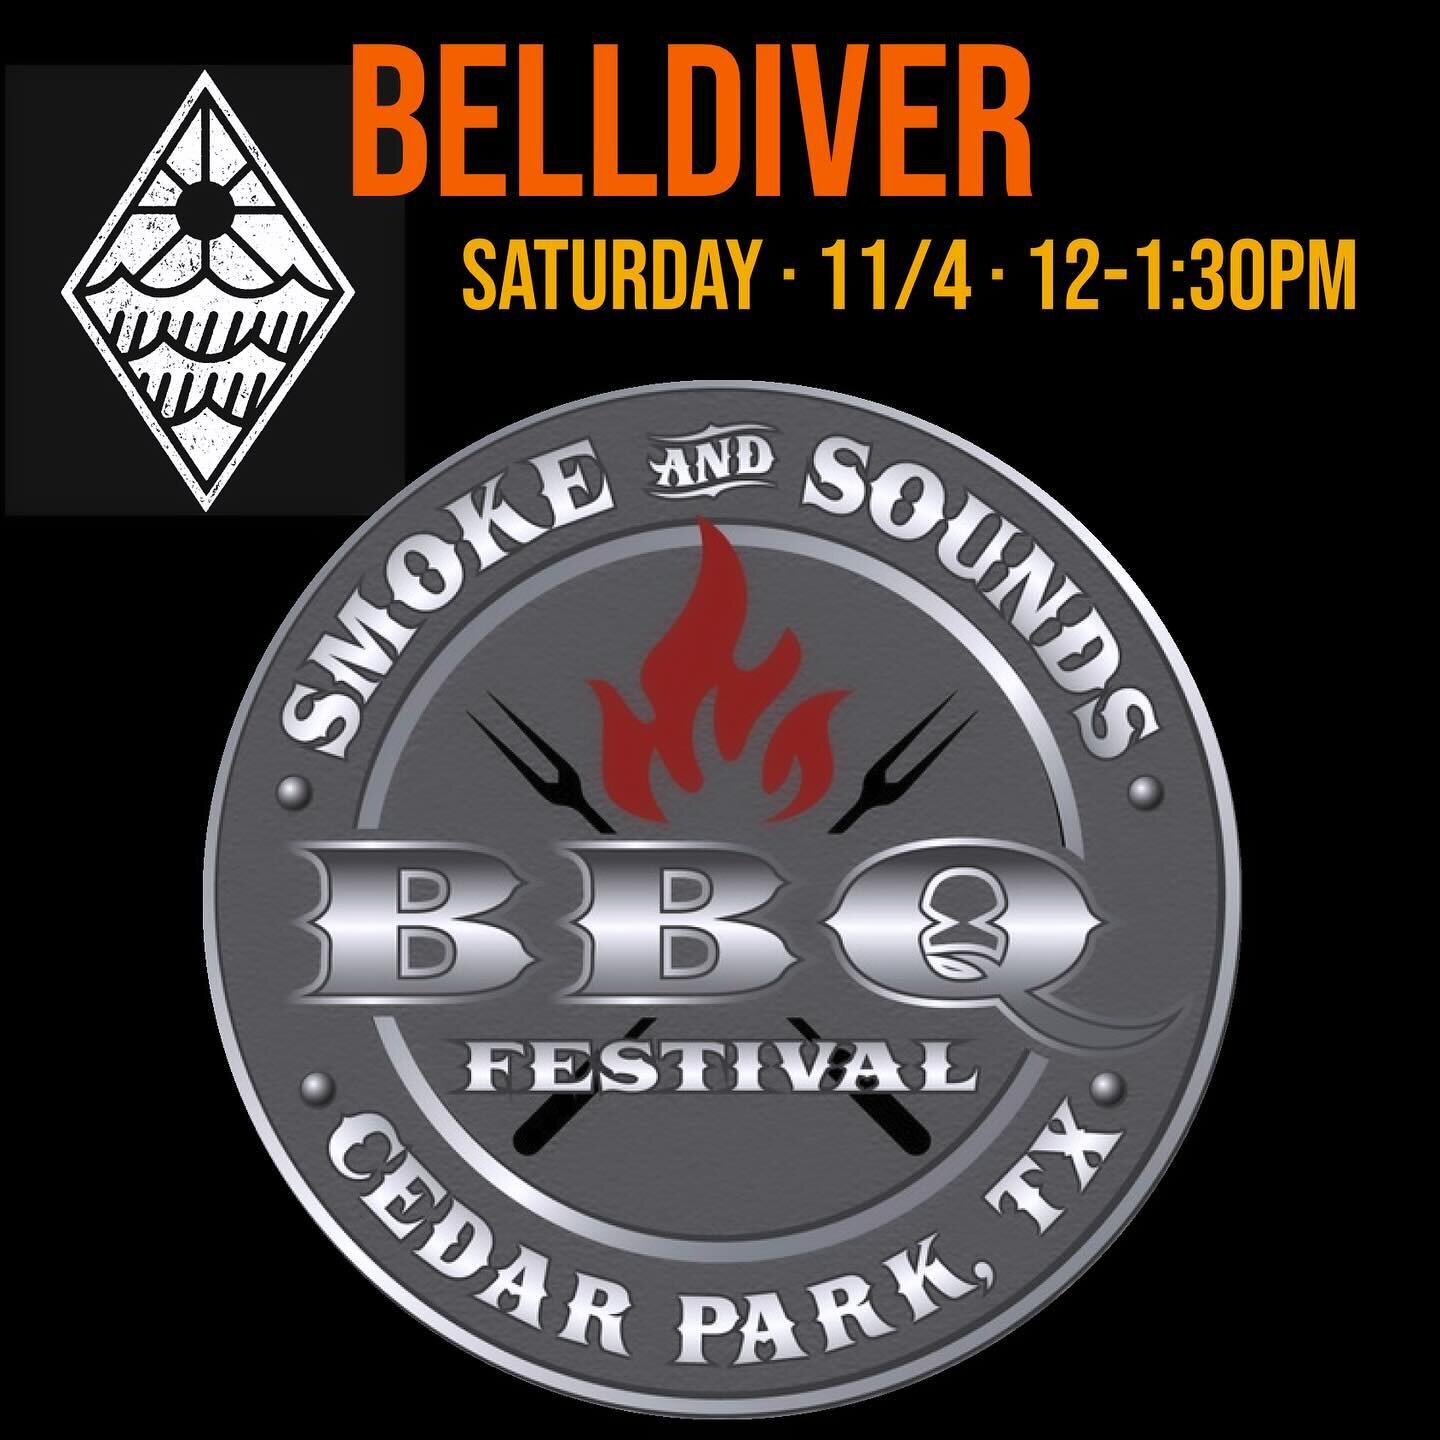 Tomorrow&rsquo;s the day! Great lineup, great food, and great weather - all for a great cause. Join us at noon but stay all day. Tickets available in advance at smokeandsounds.org